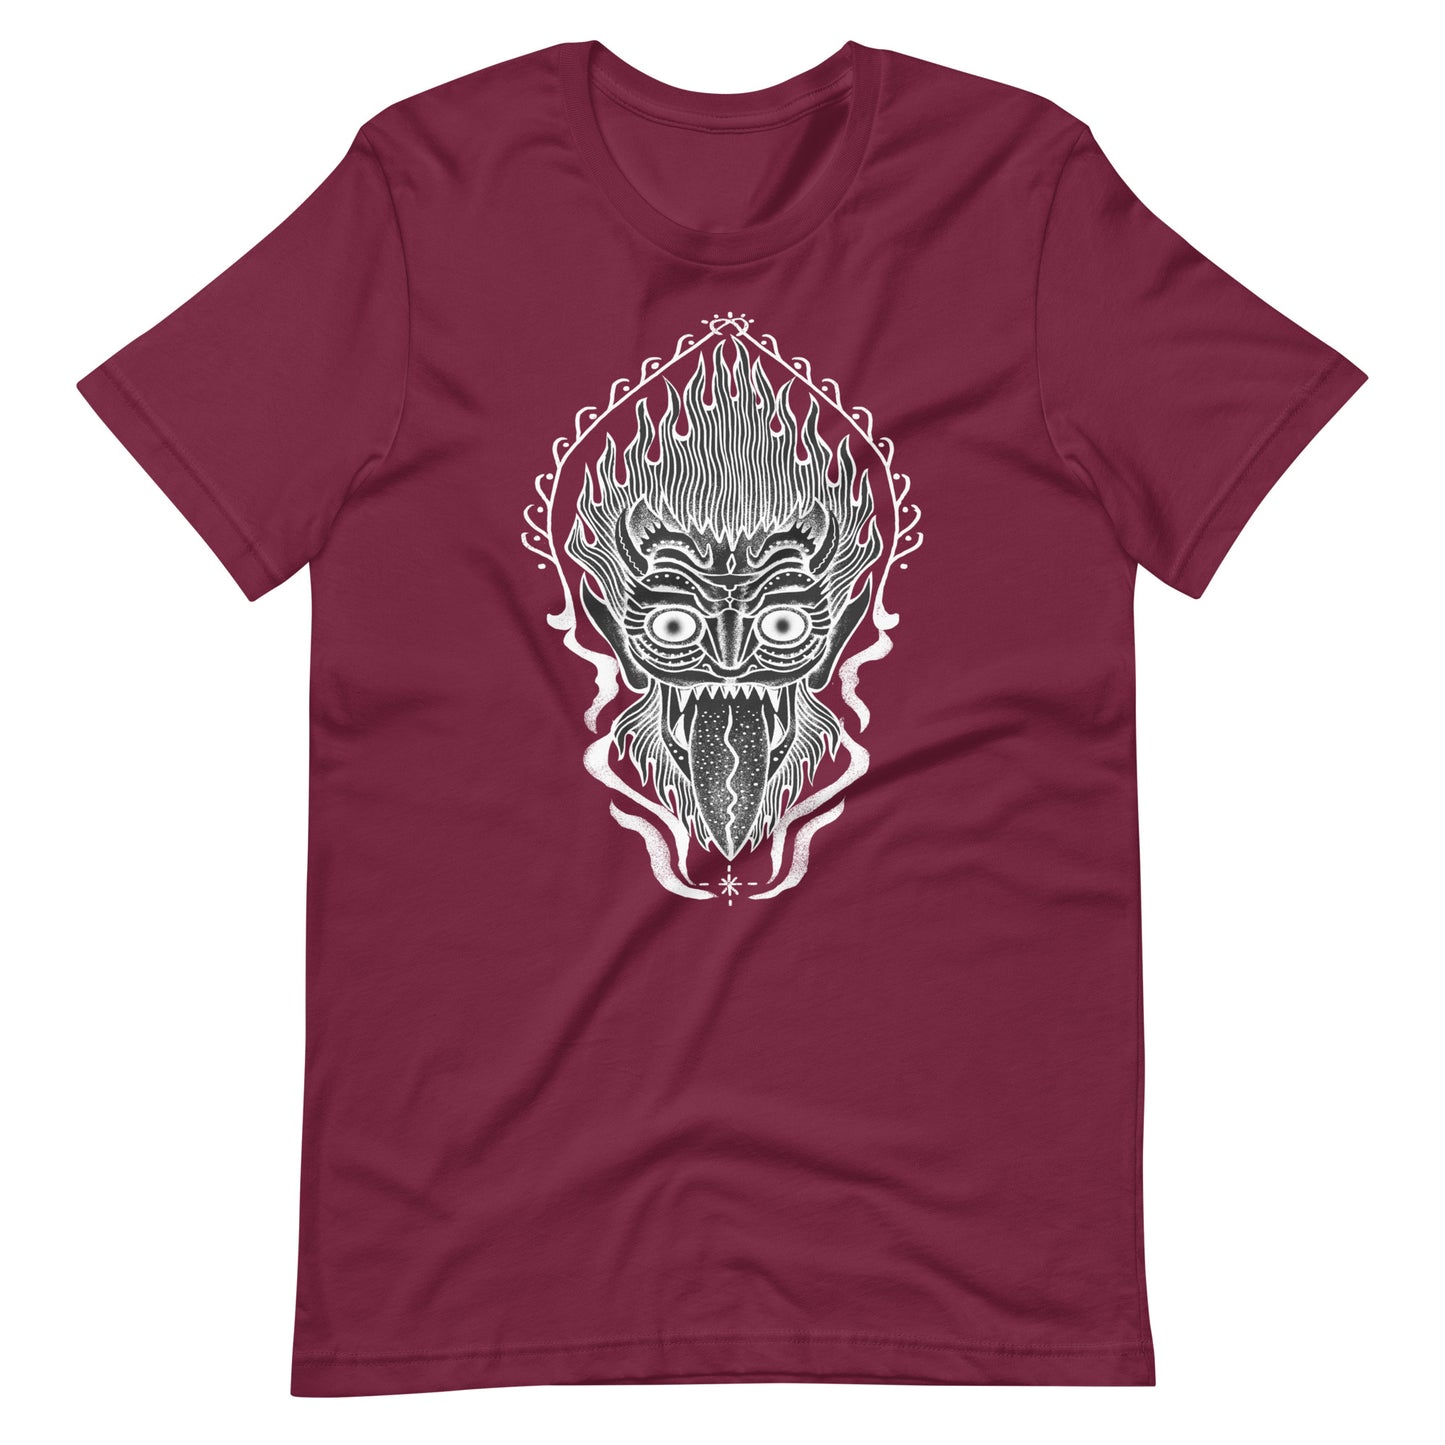 King of Fire - Men's t-shirt - Maroon Front